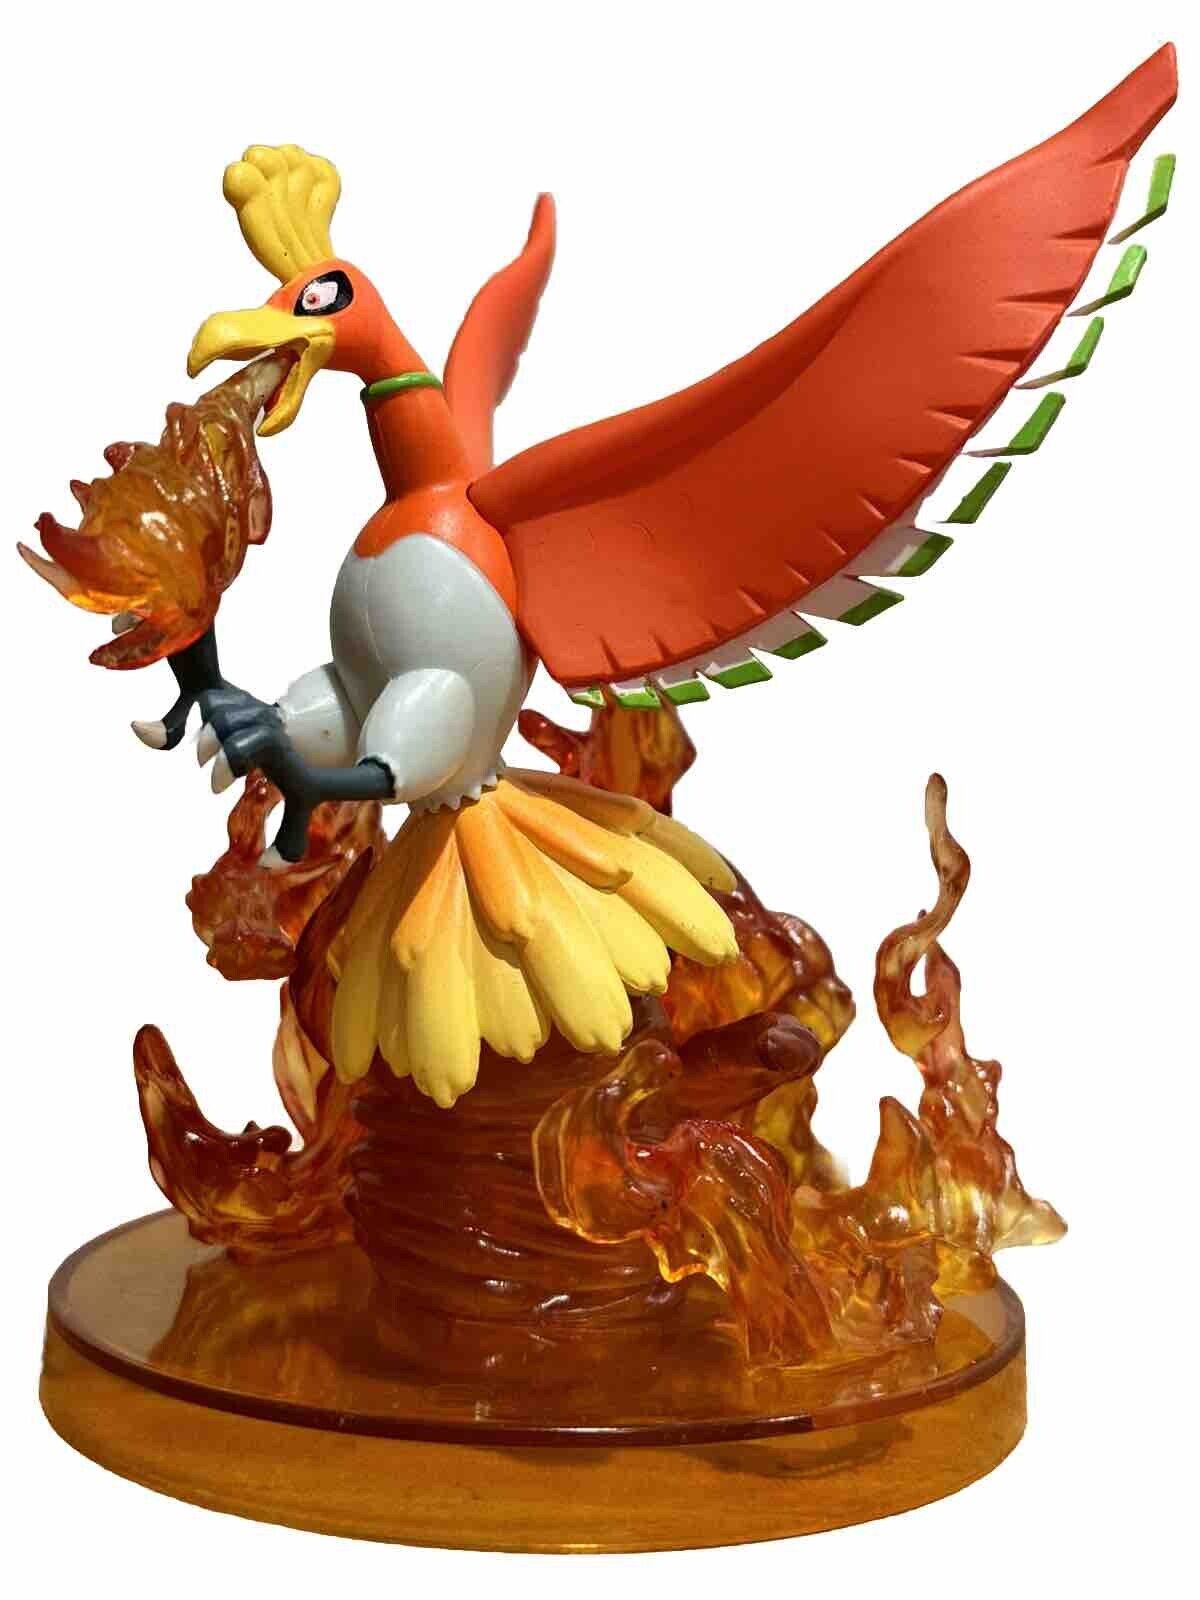 5.5” Pokemon Figure Ho-Oh Statue Model Action Figure Toy Collectible